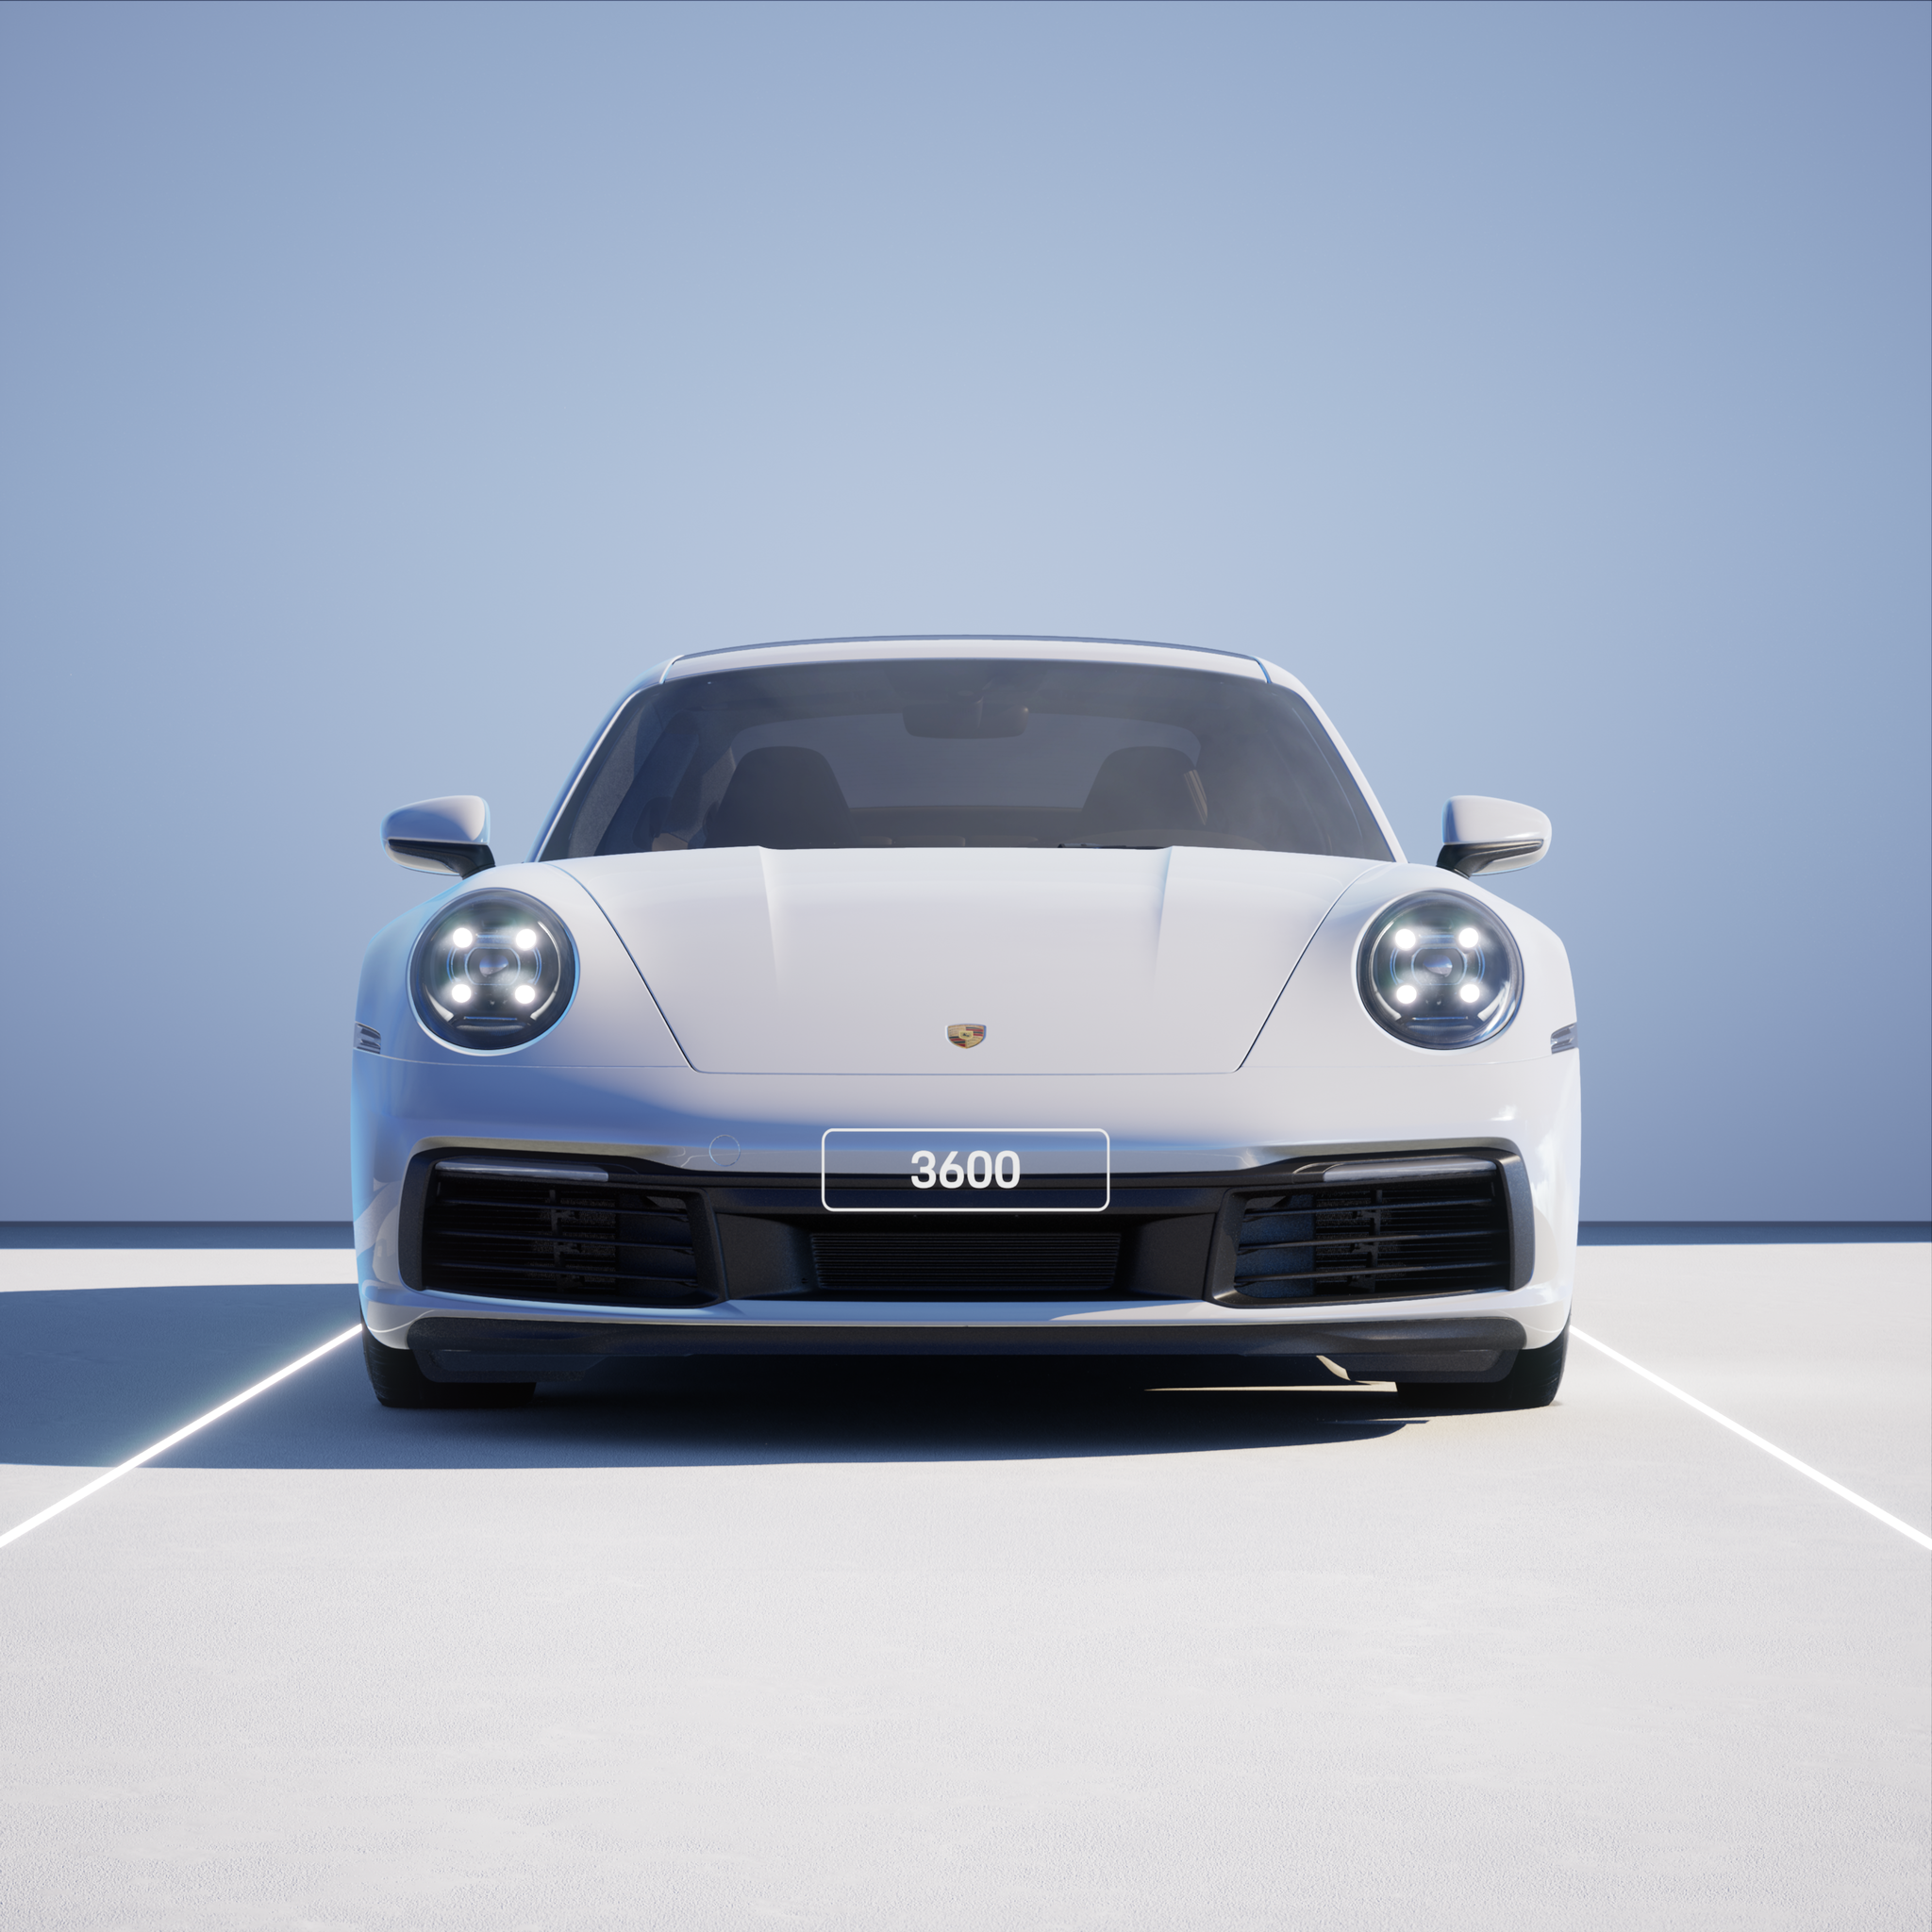 The PORSCHΞ 911 3600 image in phase